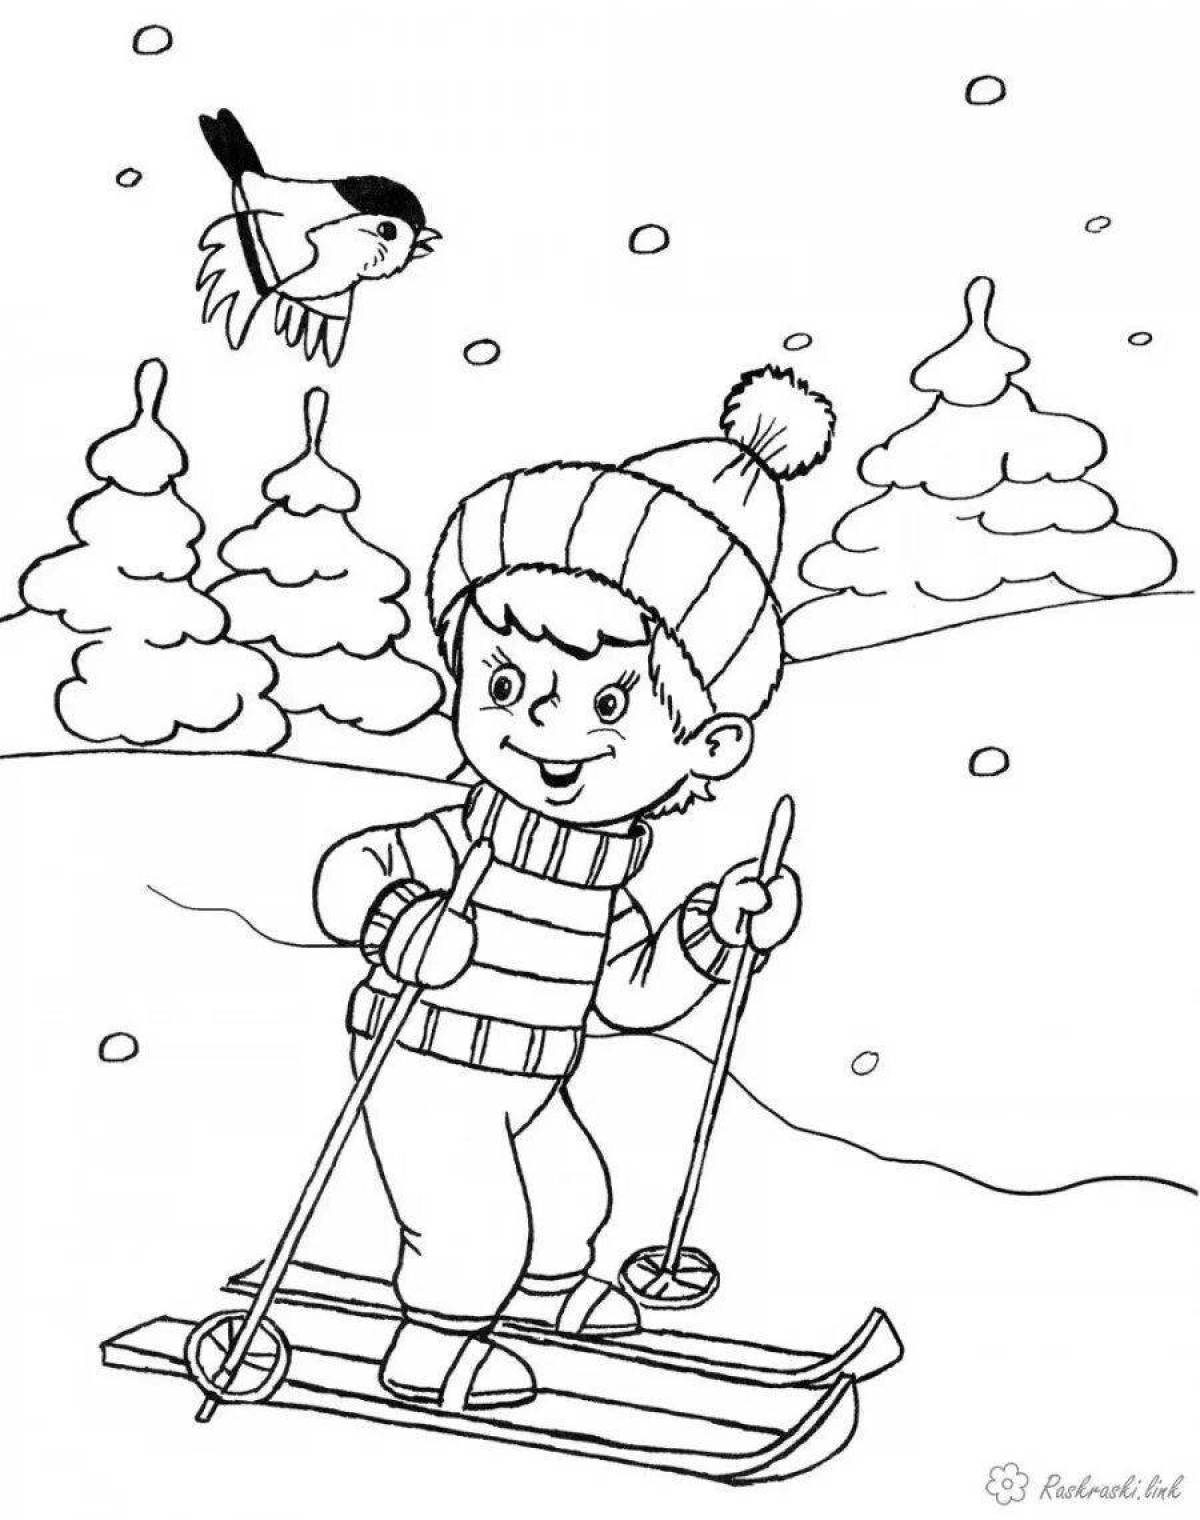 Shining skis coloring page